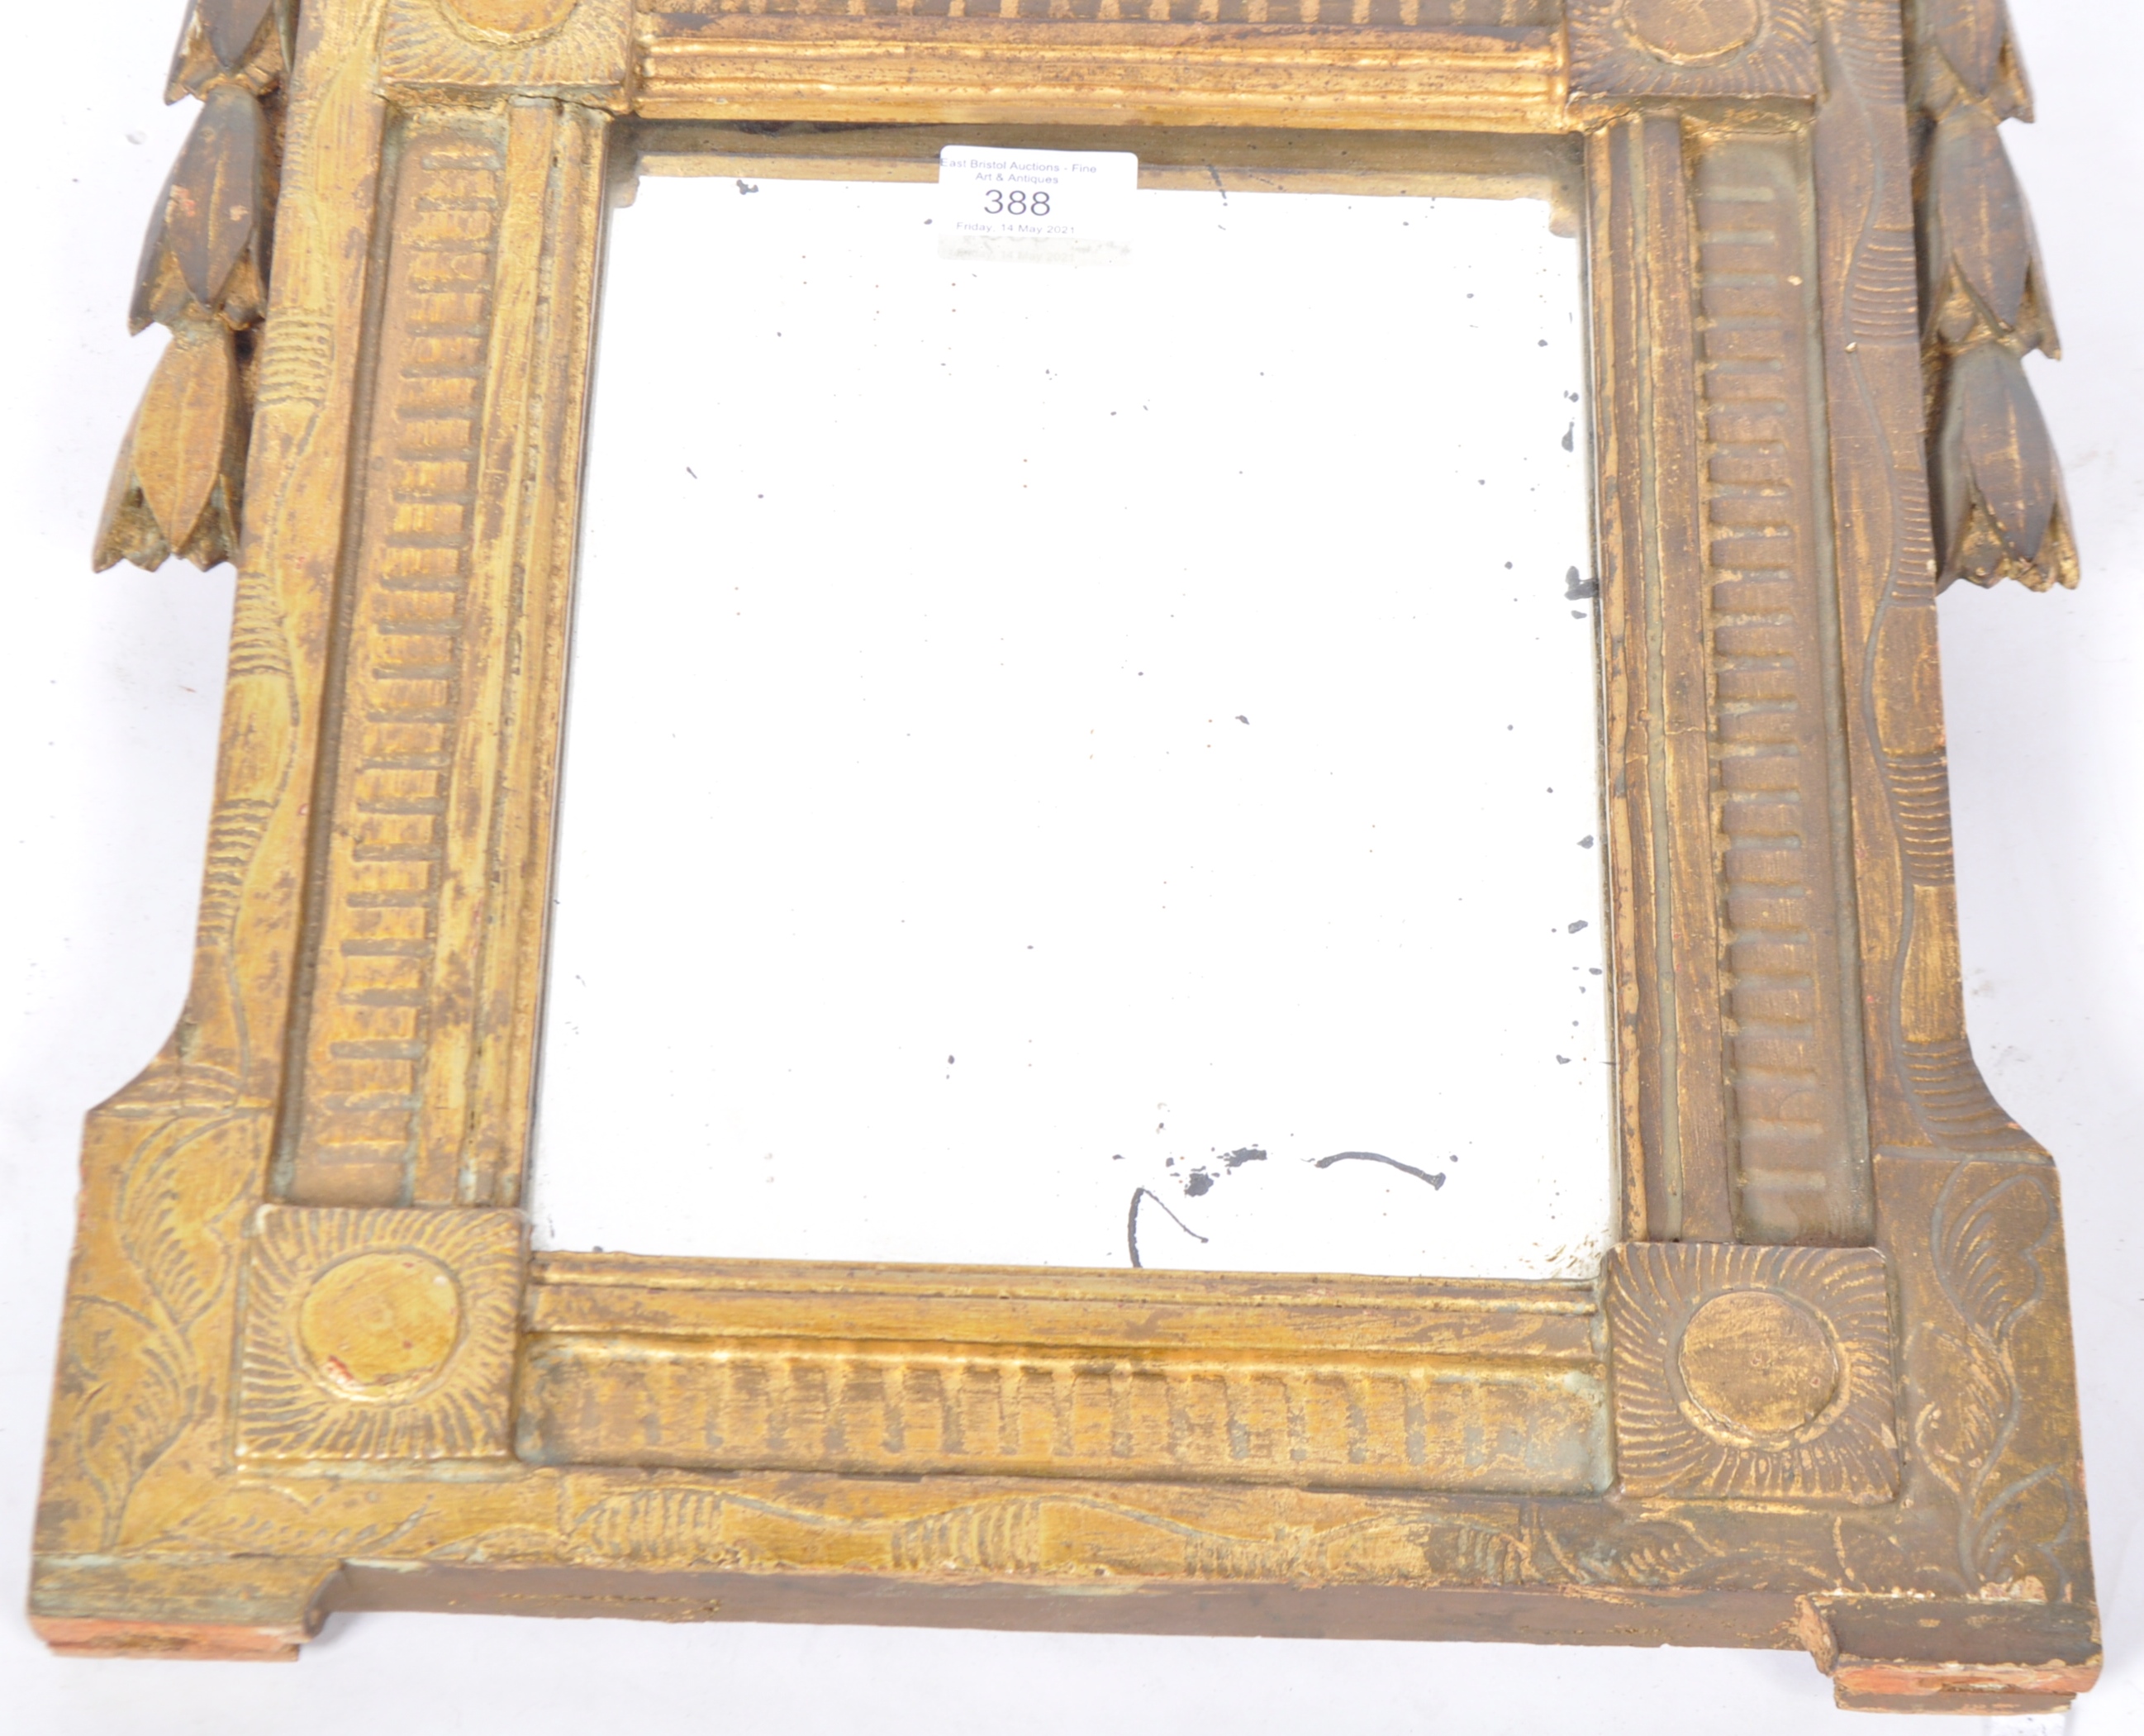 LATE 18TH CENTURY FRENCH CARVED GILT HANGING PIER MIRROR - Image 4 of 5